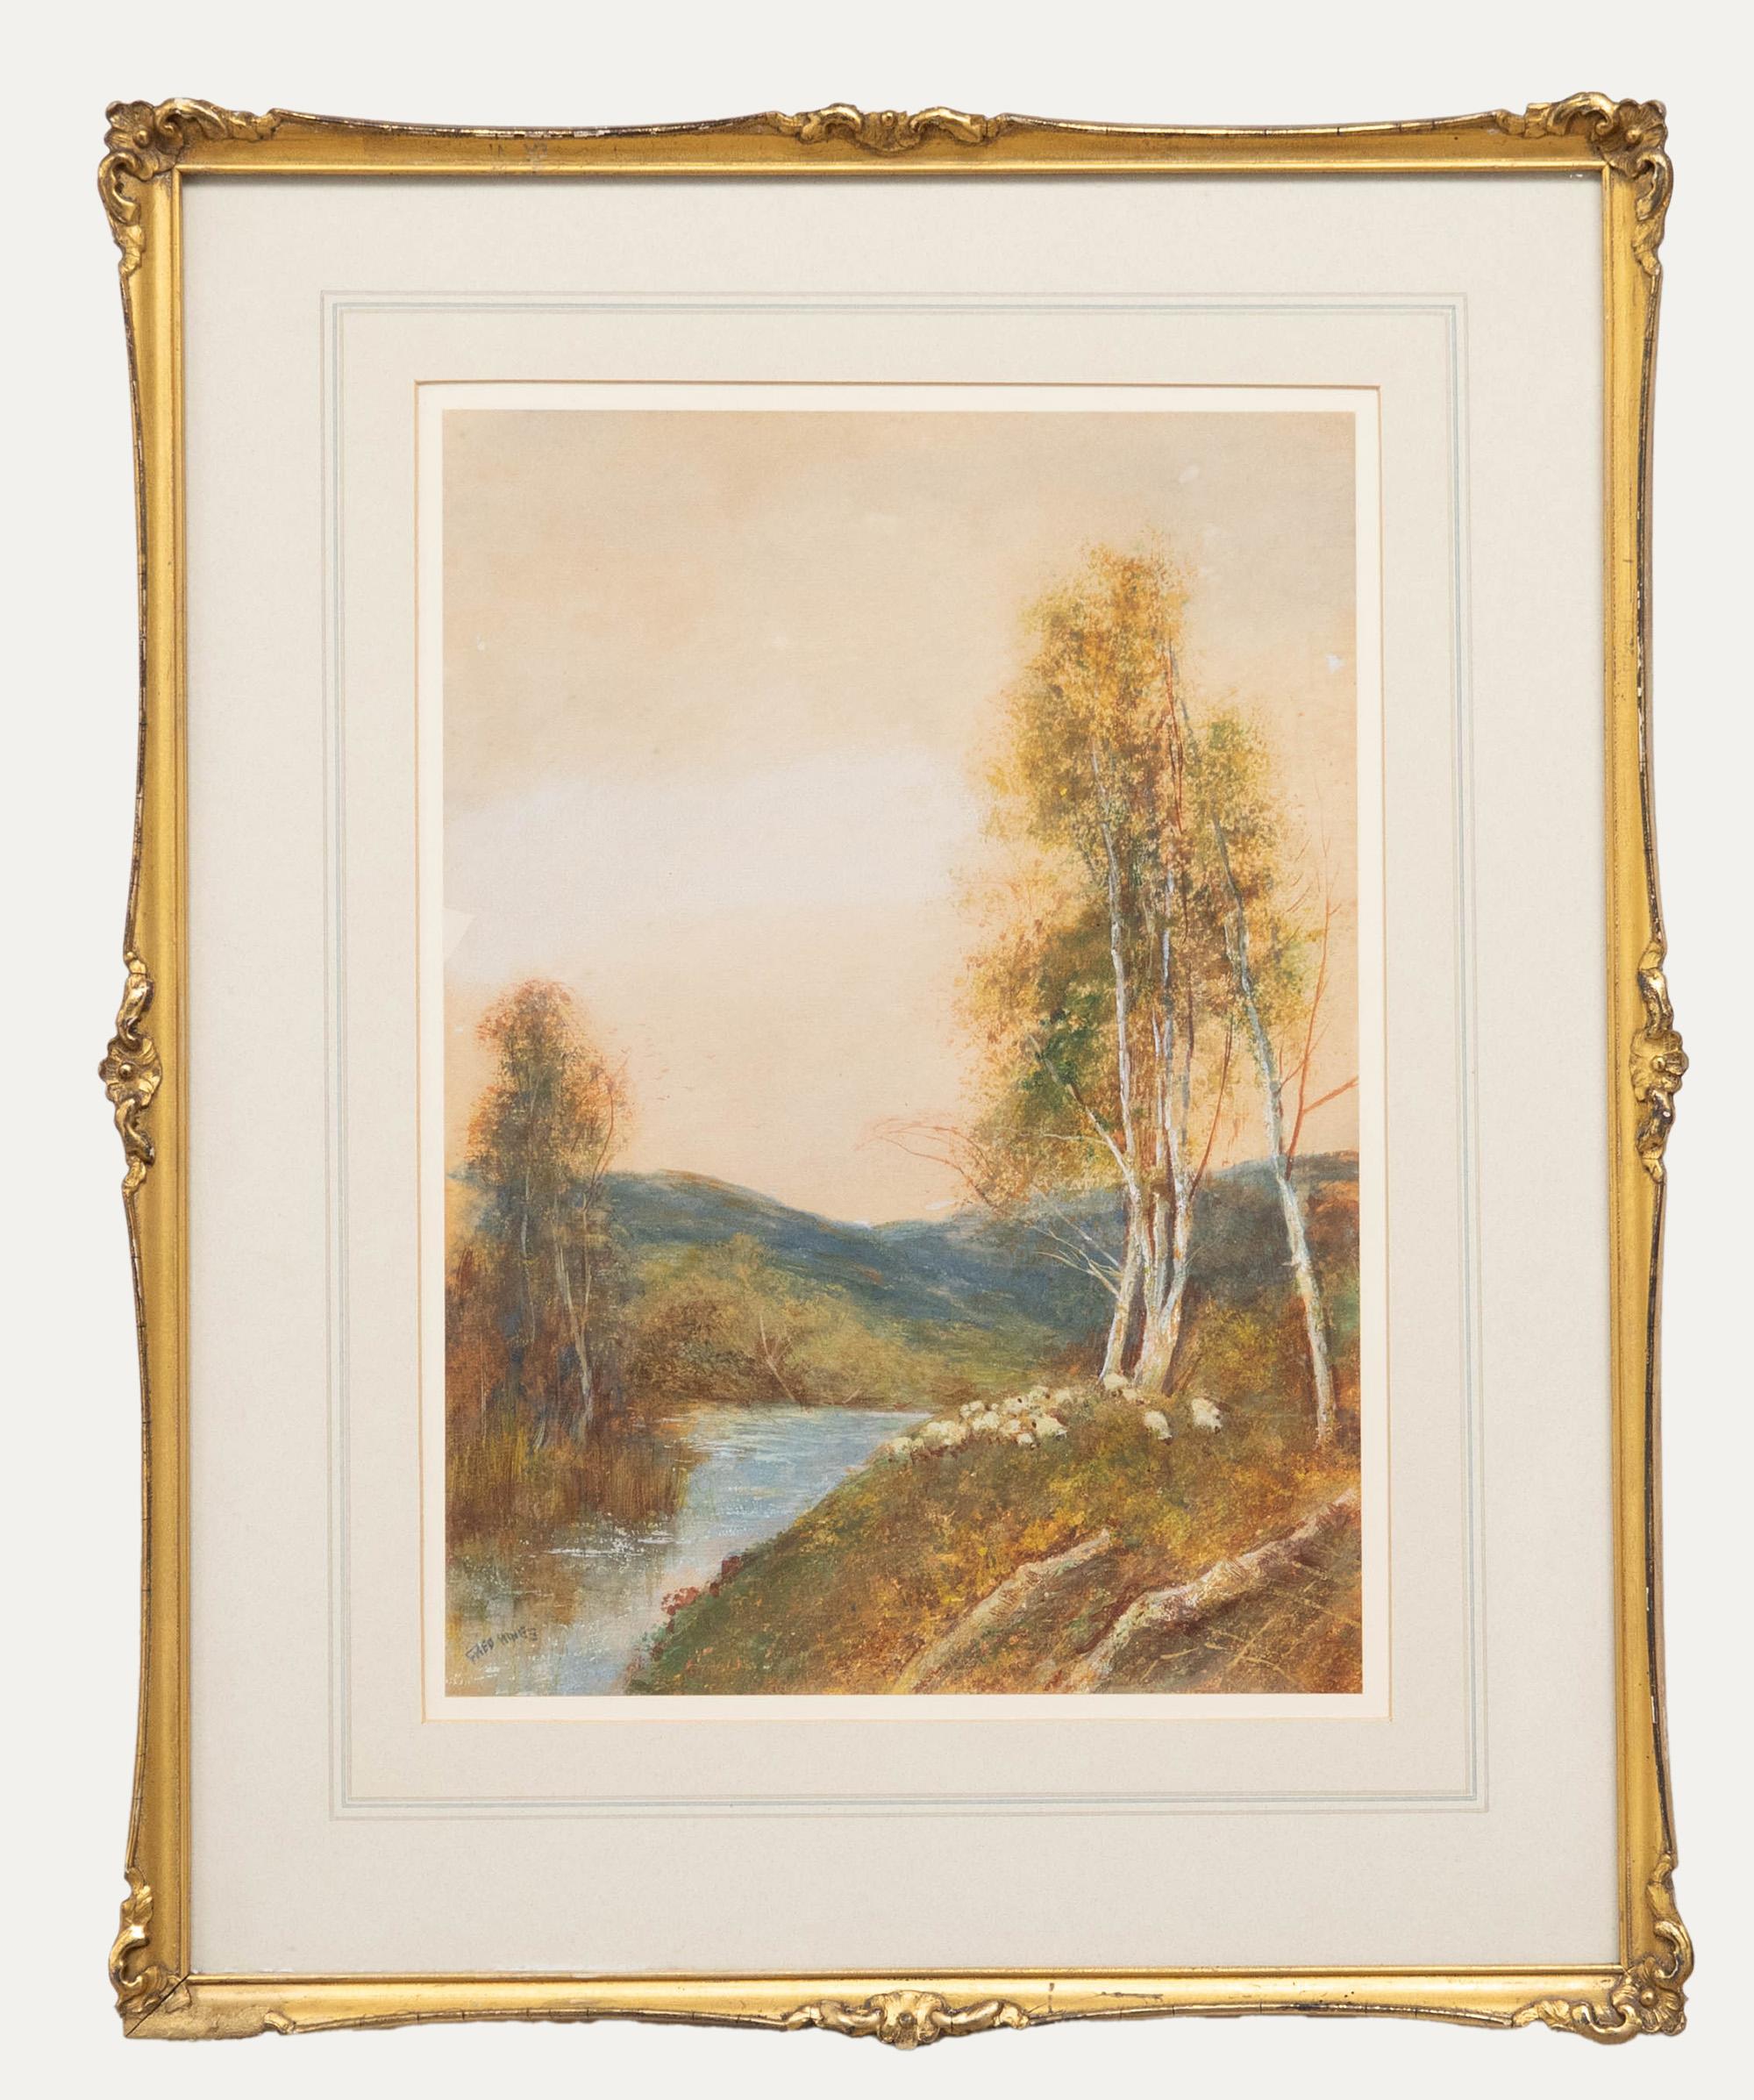 This idyllic watercolour depicts a gentle flock grazing a quiet river bank. Beautifully Presented in a gilt and swept frame with floral and acanthus ornamentation. Signed lower left. On paper.